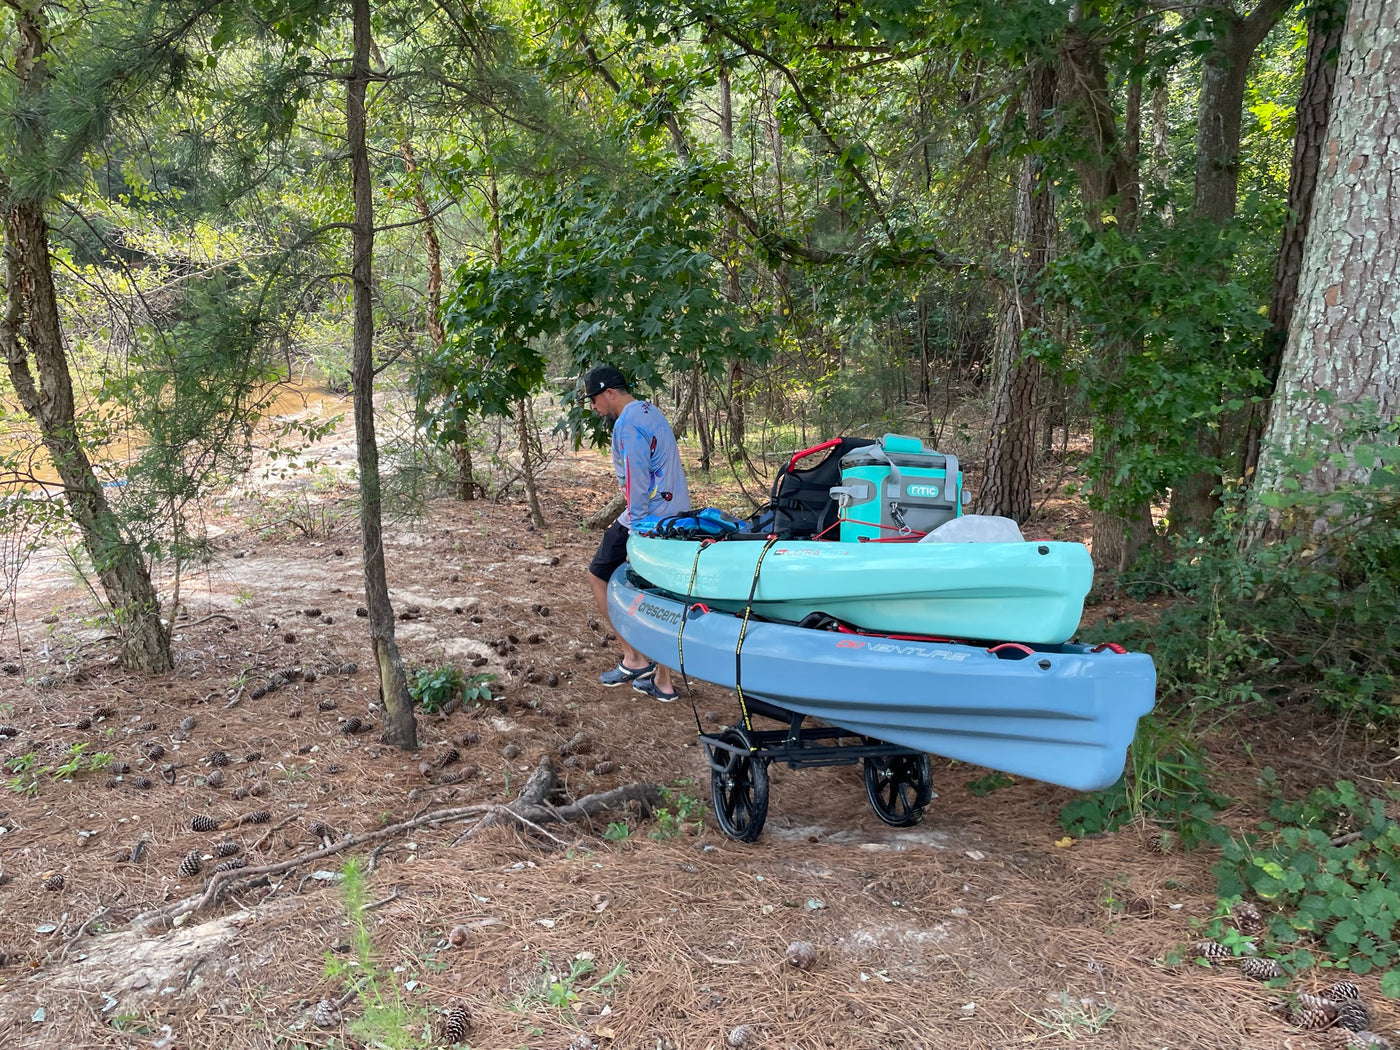 Man pulling 2 kayaks on the all-terrain cart through the woods